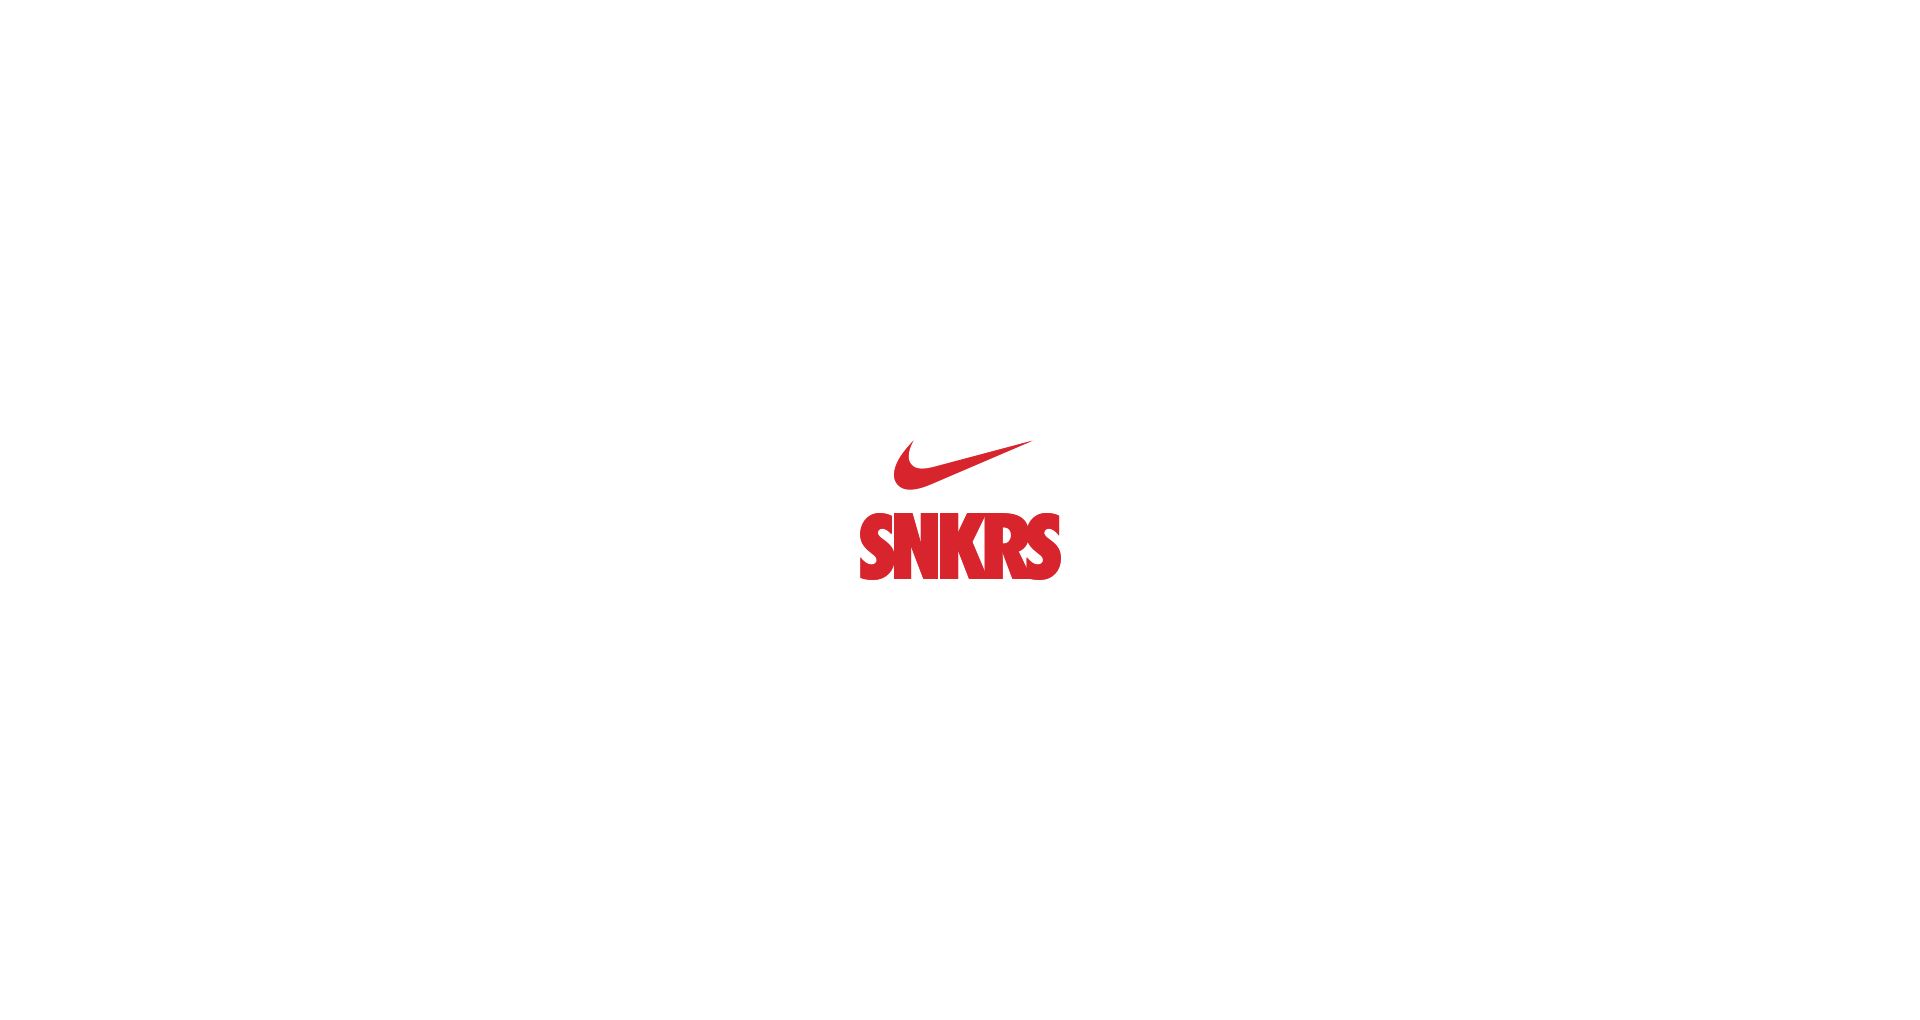 What You Got. Nike SNKRS